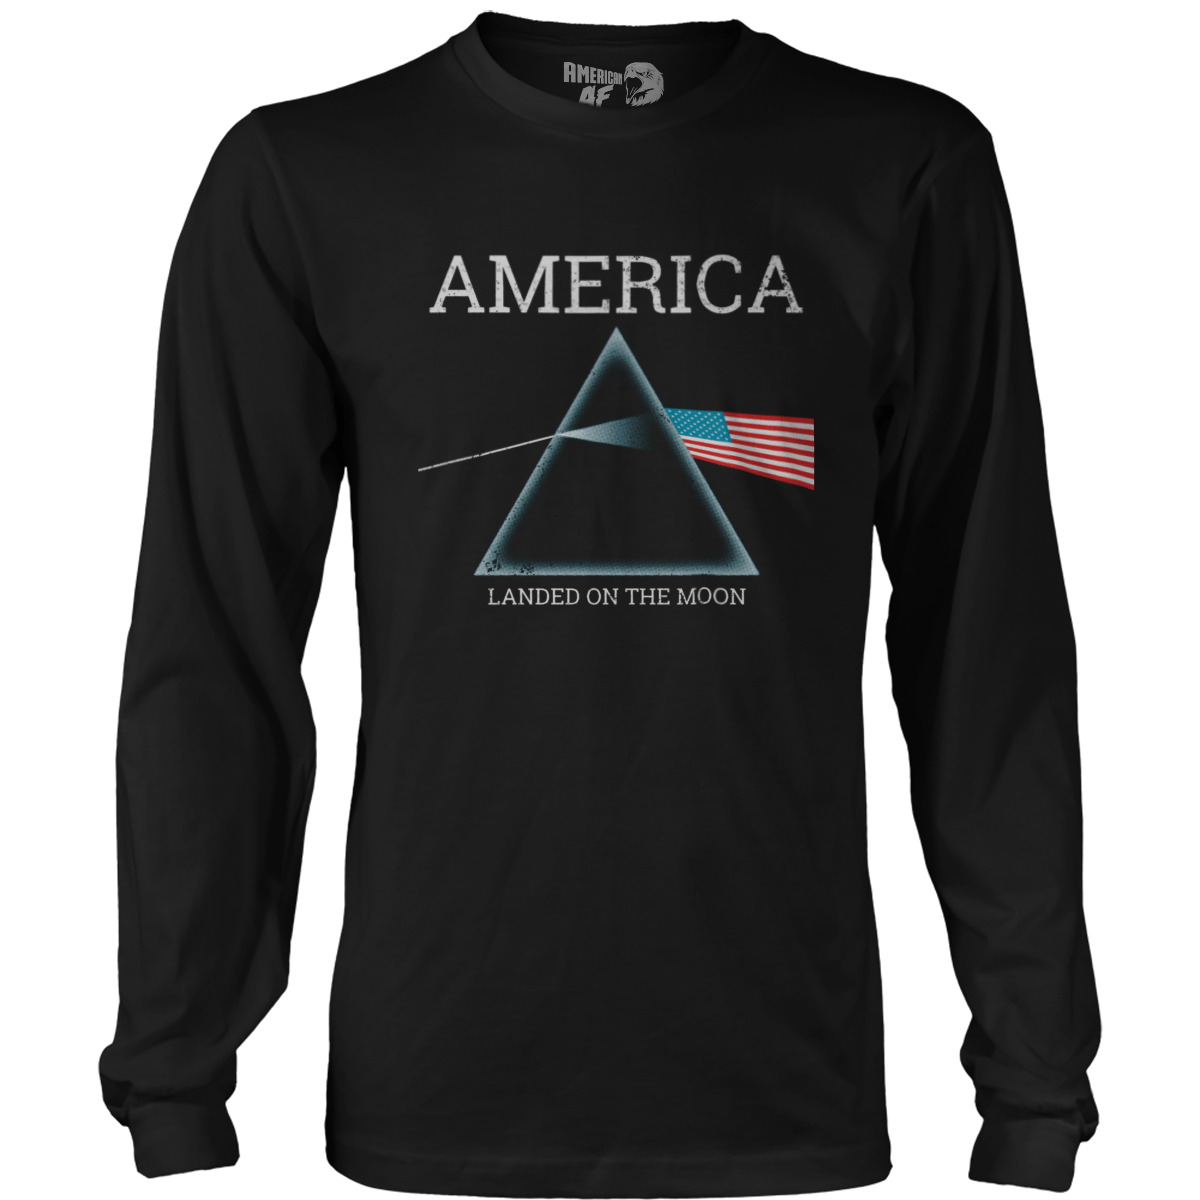 Apparel Mens Long Sleeve / Black / S Landed on the Moon - January 2020 Club AAF Exclusive Design